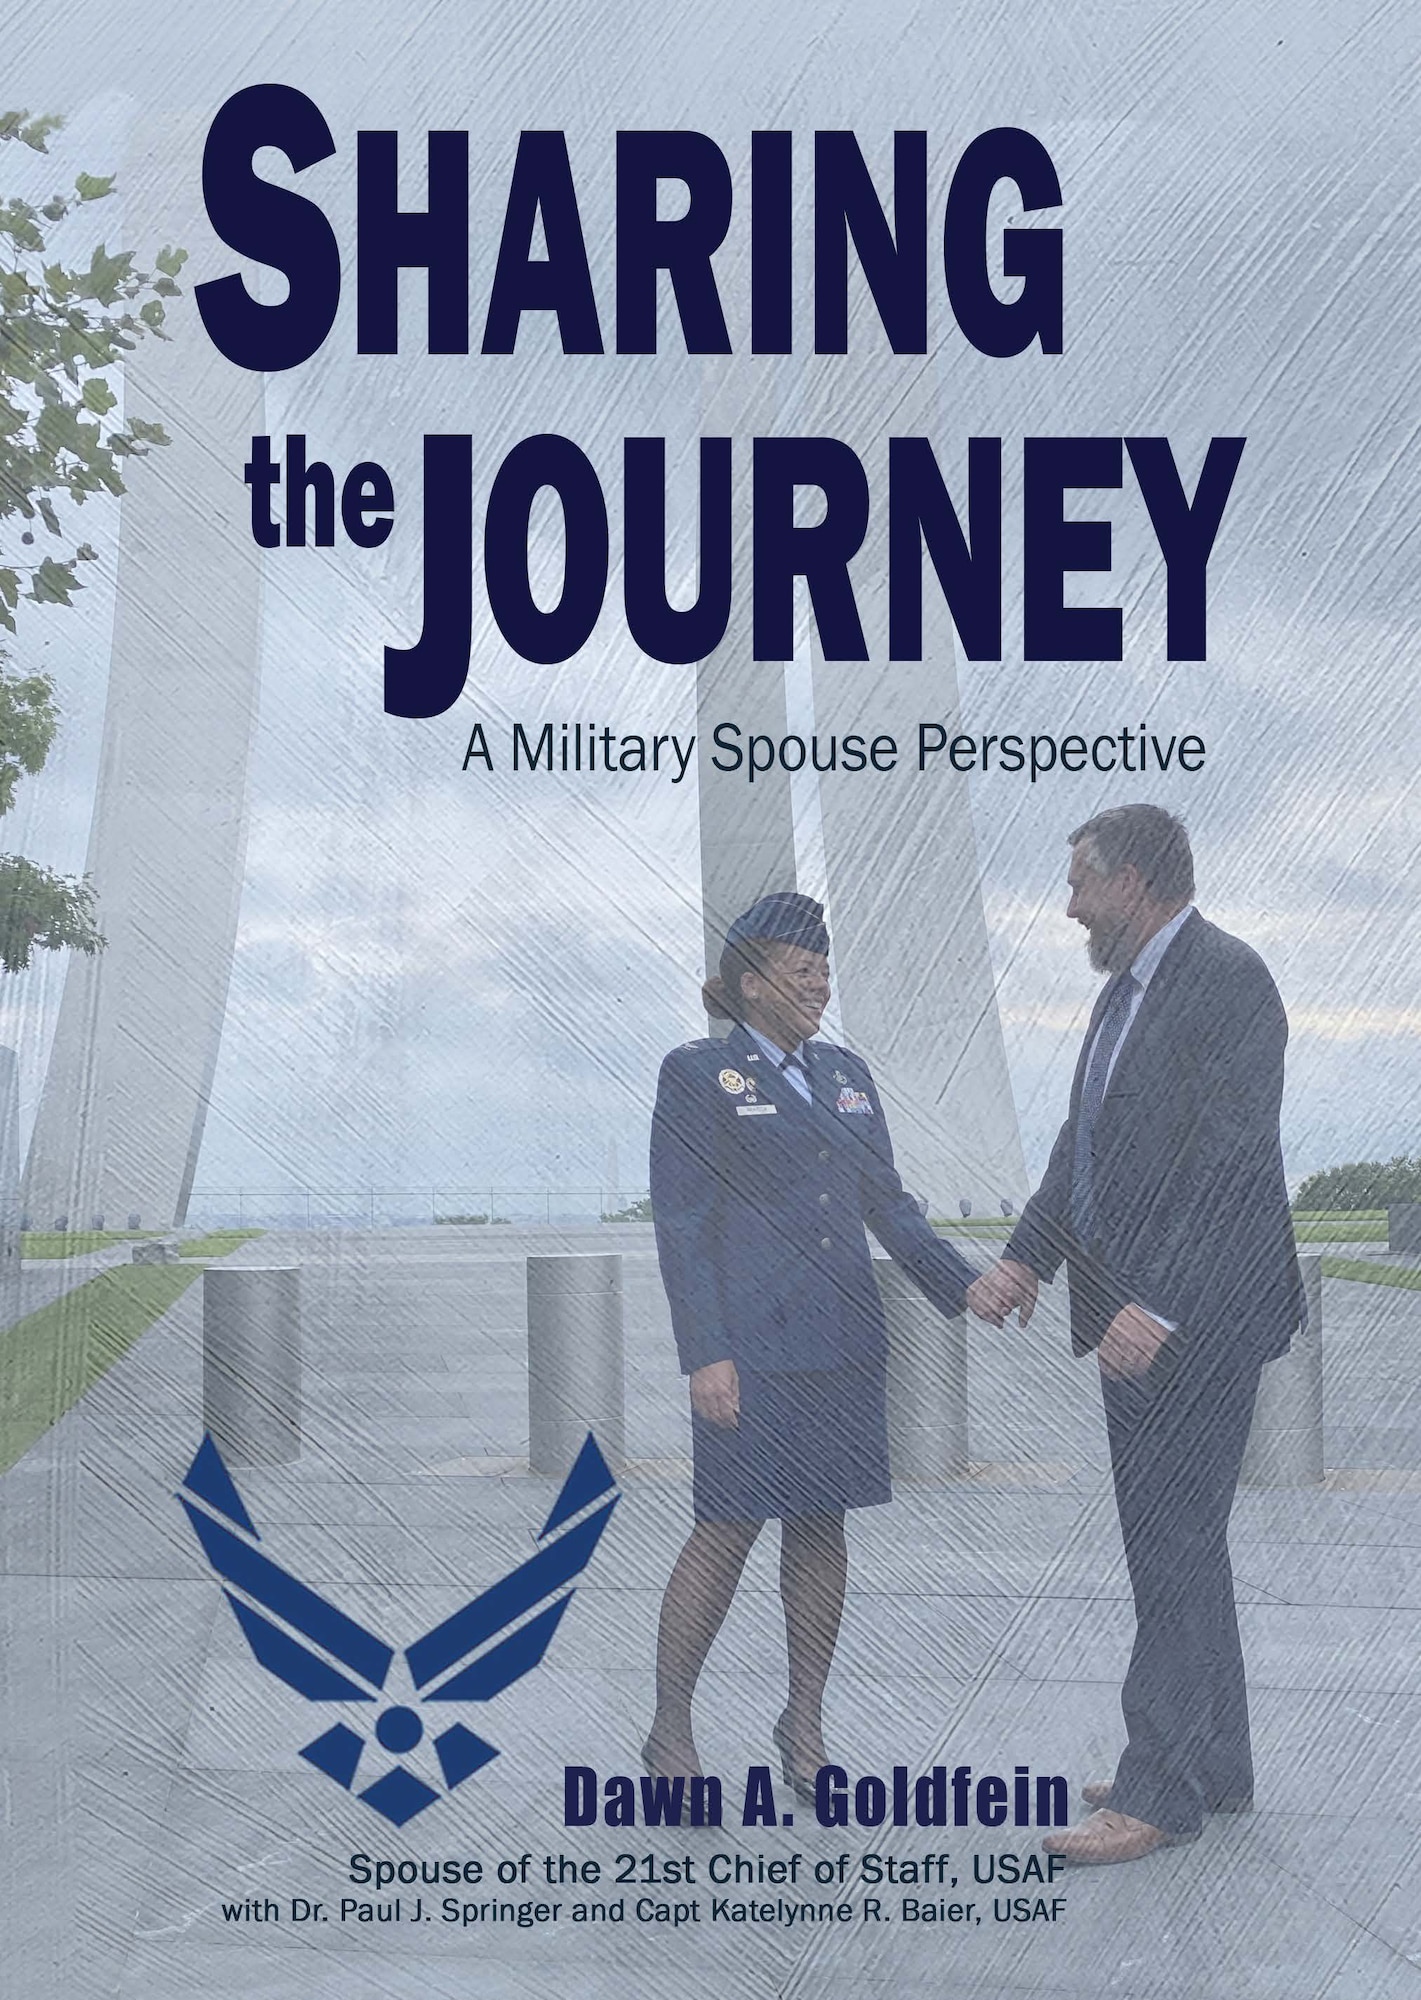 Air University Press’s newest book release is Sharing the Journey: A Military Spouse Perspective by Dawn A. Goldfein, with Paul J. Springer, director of research, Air Command and Staff College, and Capt. Katelynne R. Baier, aide-de-camp to the chief of staff of the Air Force. (Courtesy graphic)